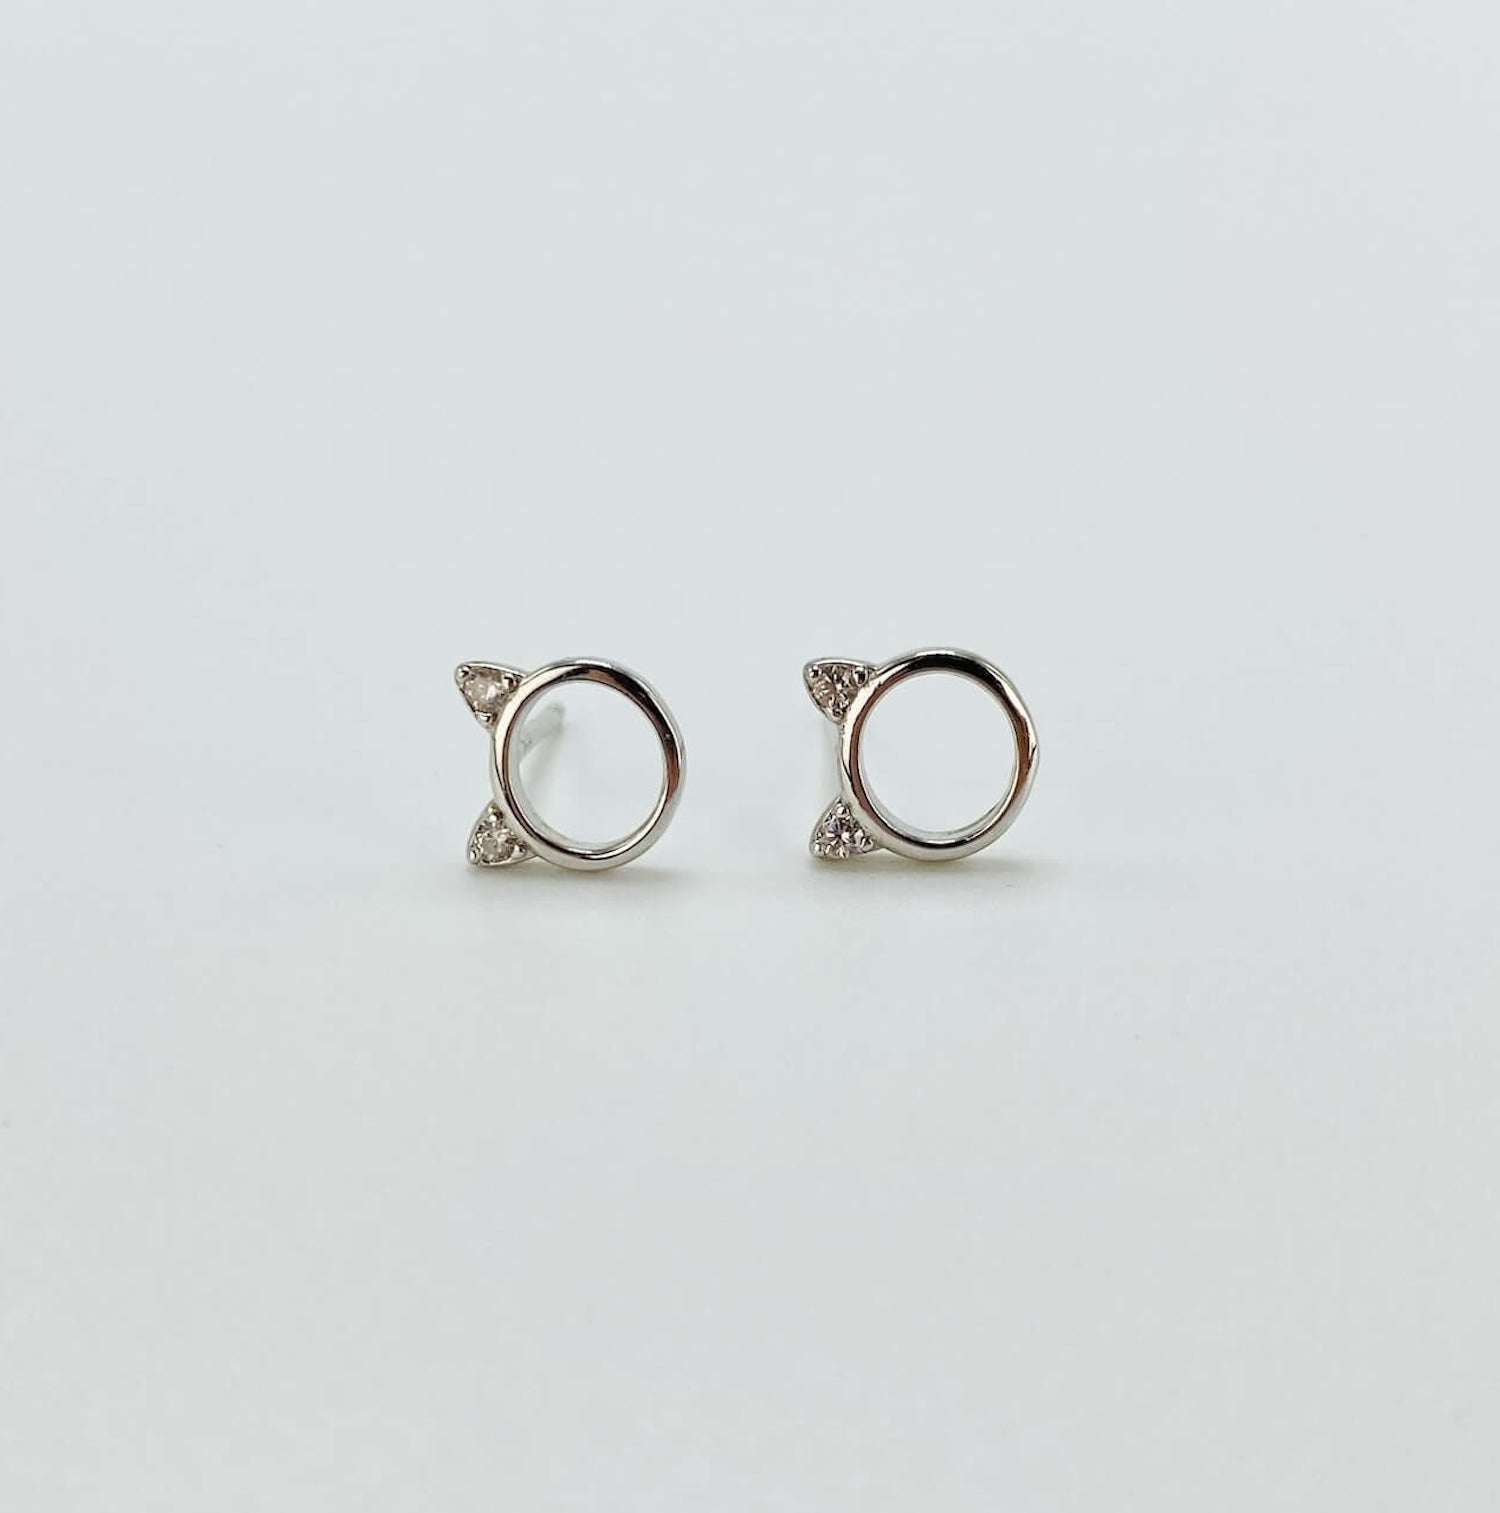 Sterling silver minimalist cat head "o" stud earrings with cubic zirconia gems in rose gold and silver.